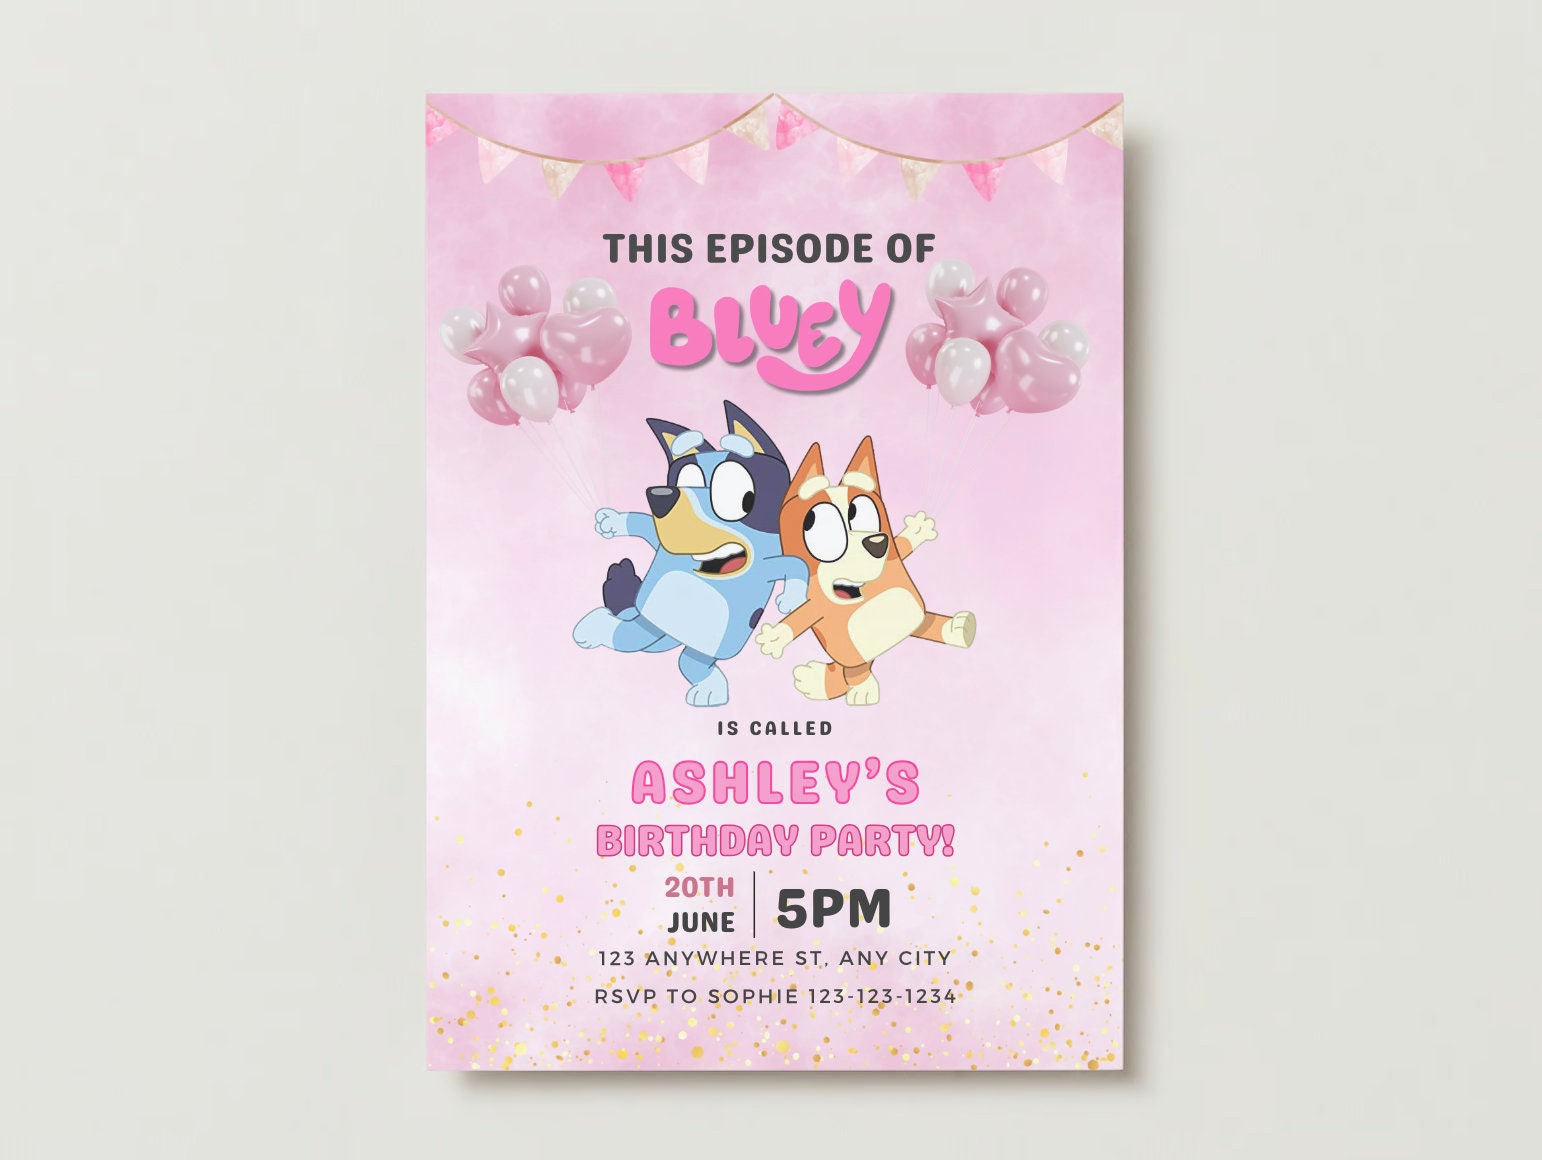 Personalized Printable Pink-themed Bluey Birthday Party Banner for